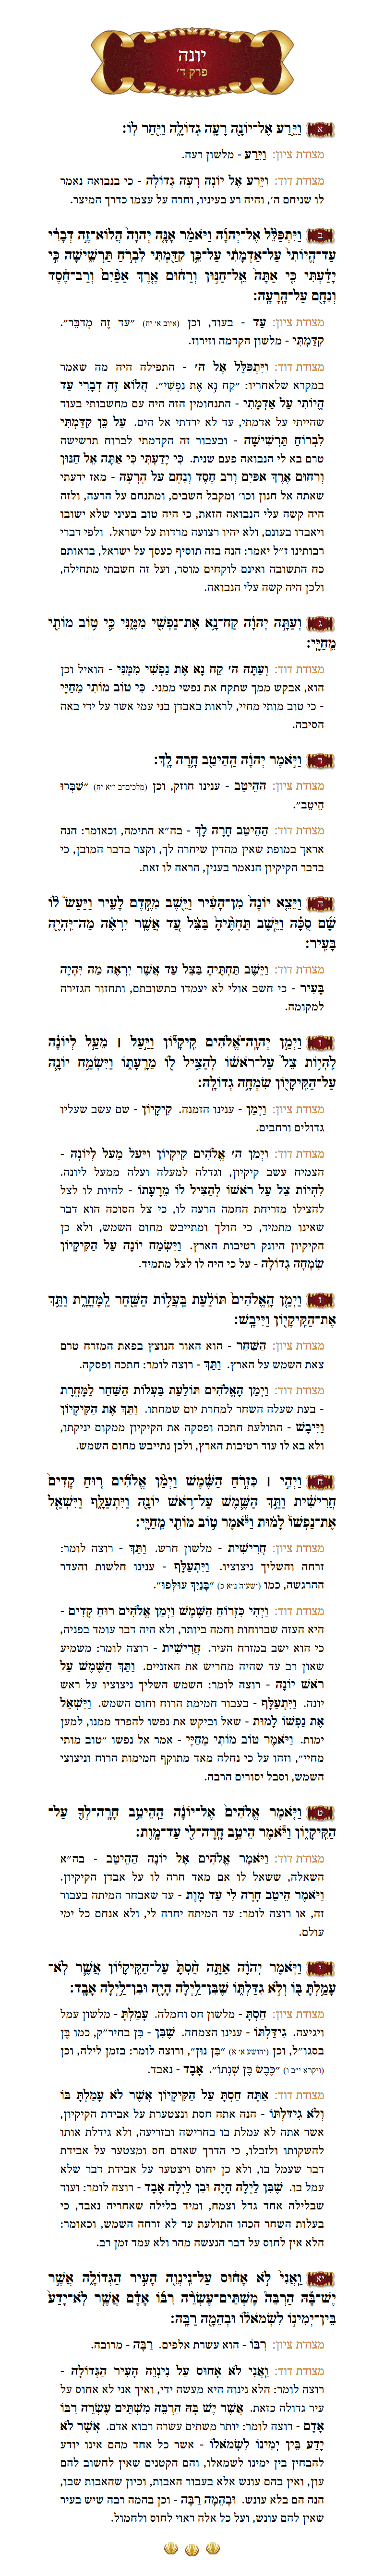 Sefer Yonah Chapter 4 with commentary